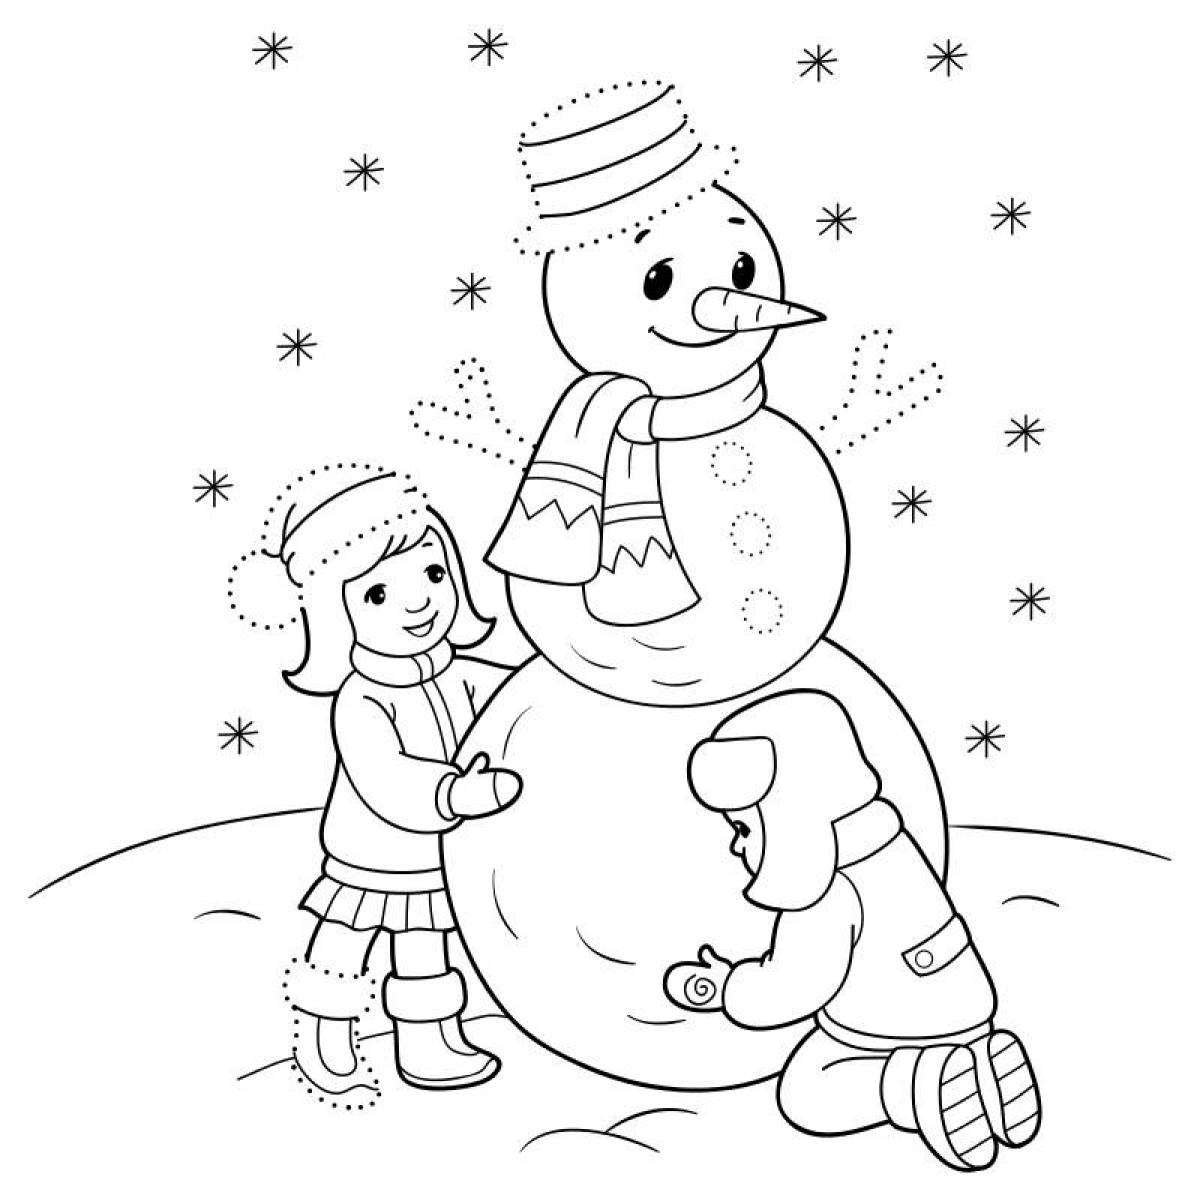 Exotic coloring book for kids winter fun 5-6 years old